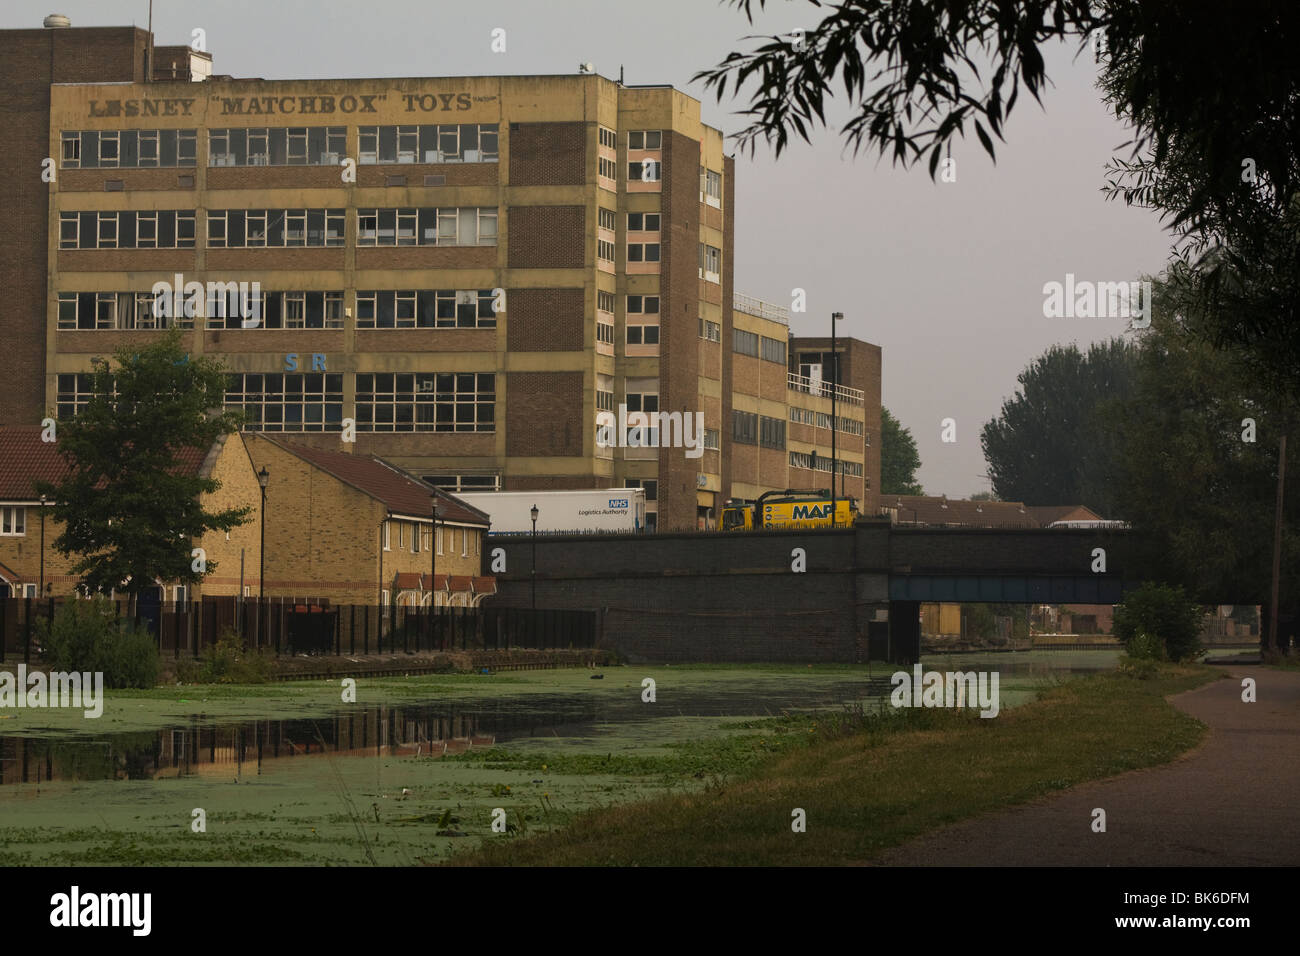 The Lesney Matchbox Toy factory standing derelict on River Lee London, Hackney, before demolition began in 2010. Stock Photo